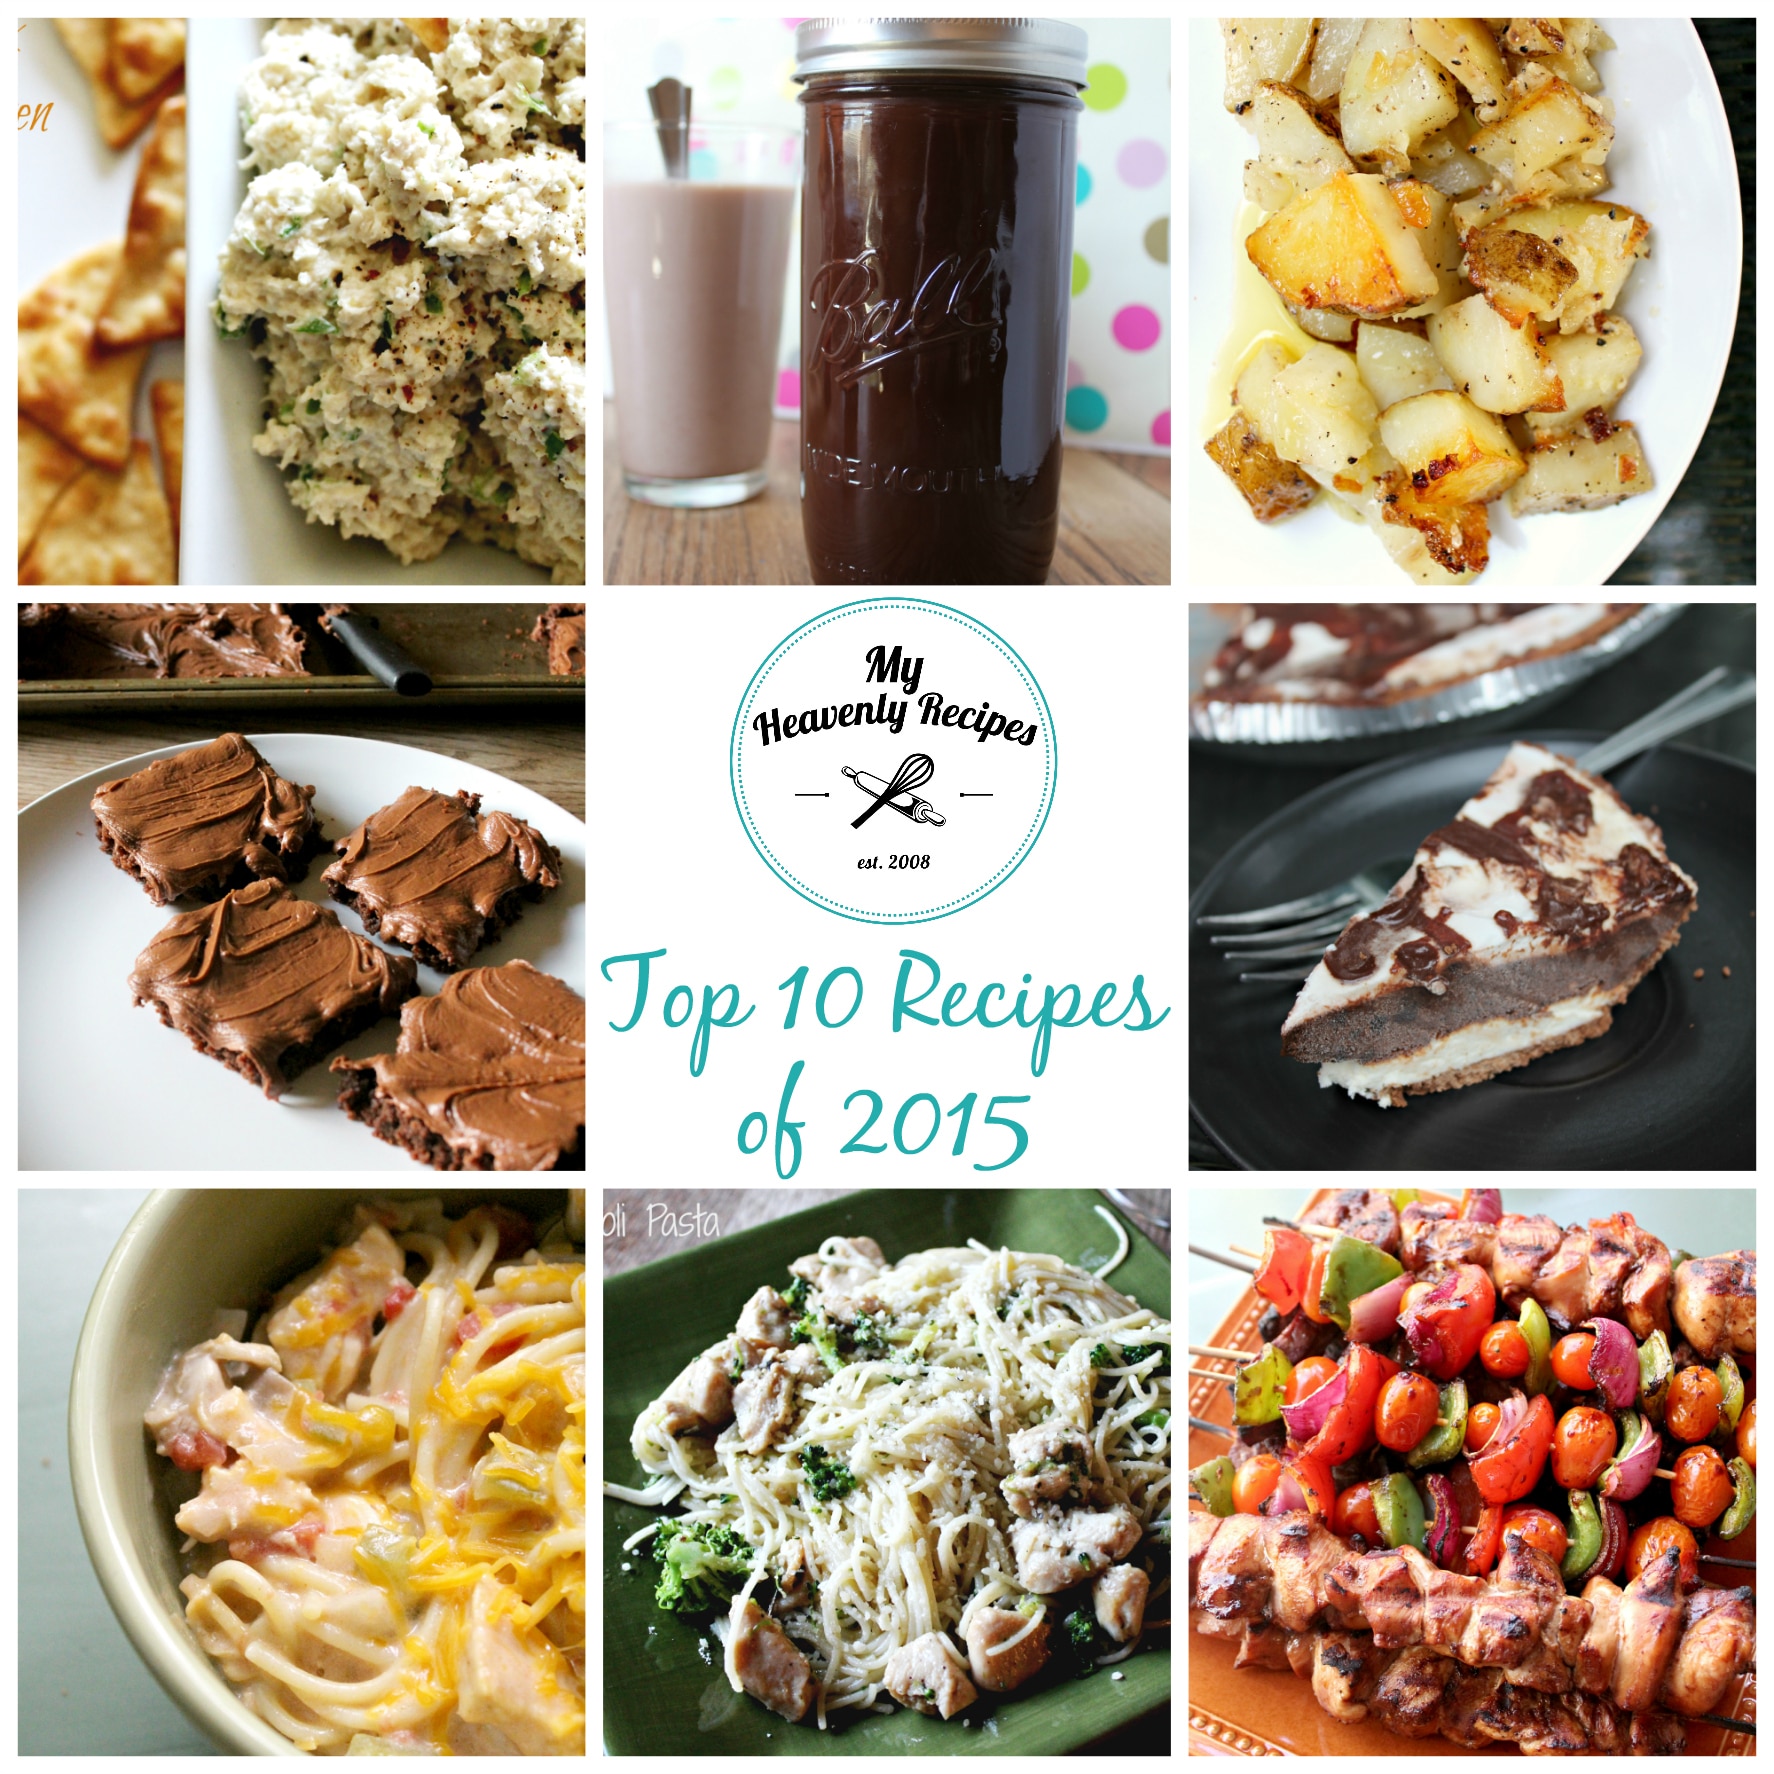 MHR’S Top 10 Recipes of 2015